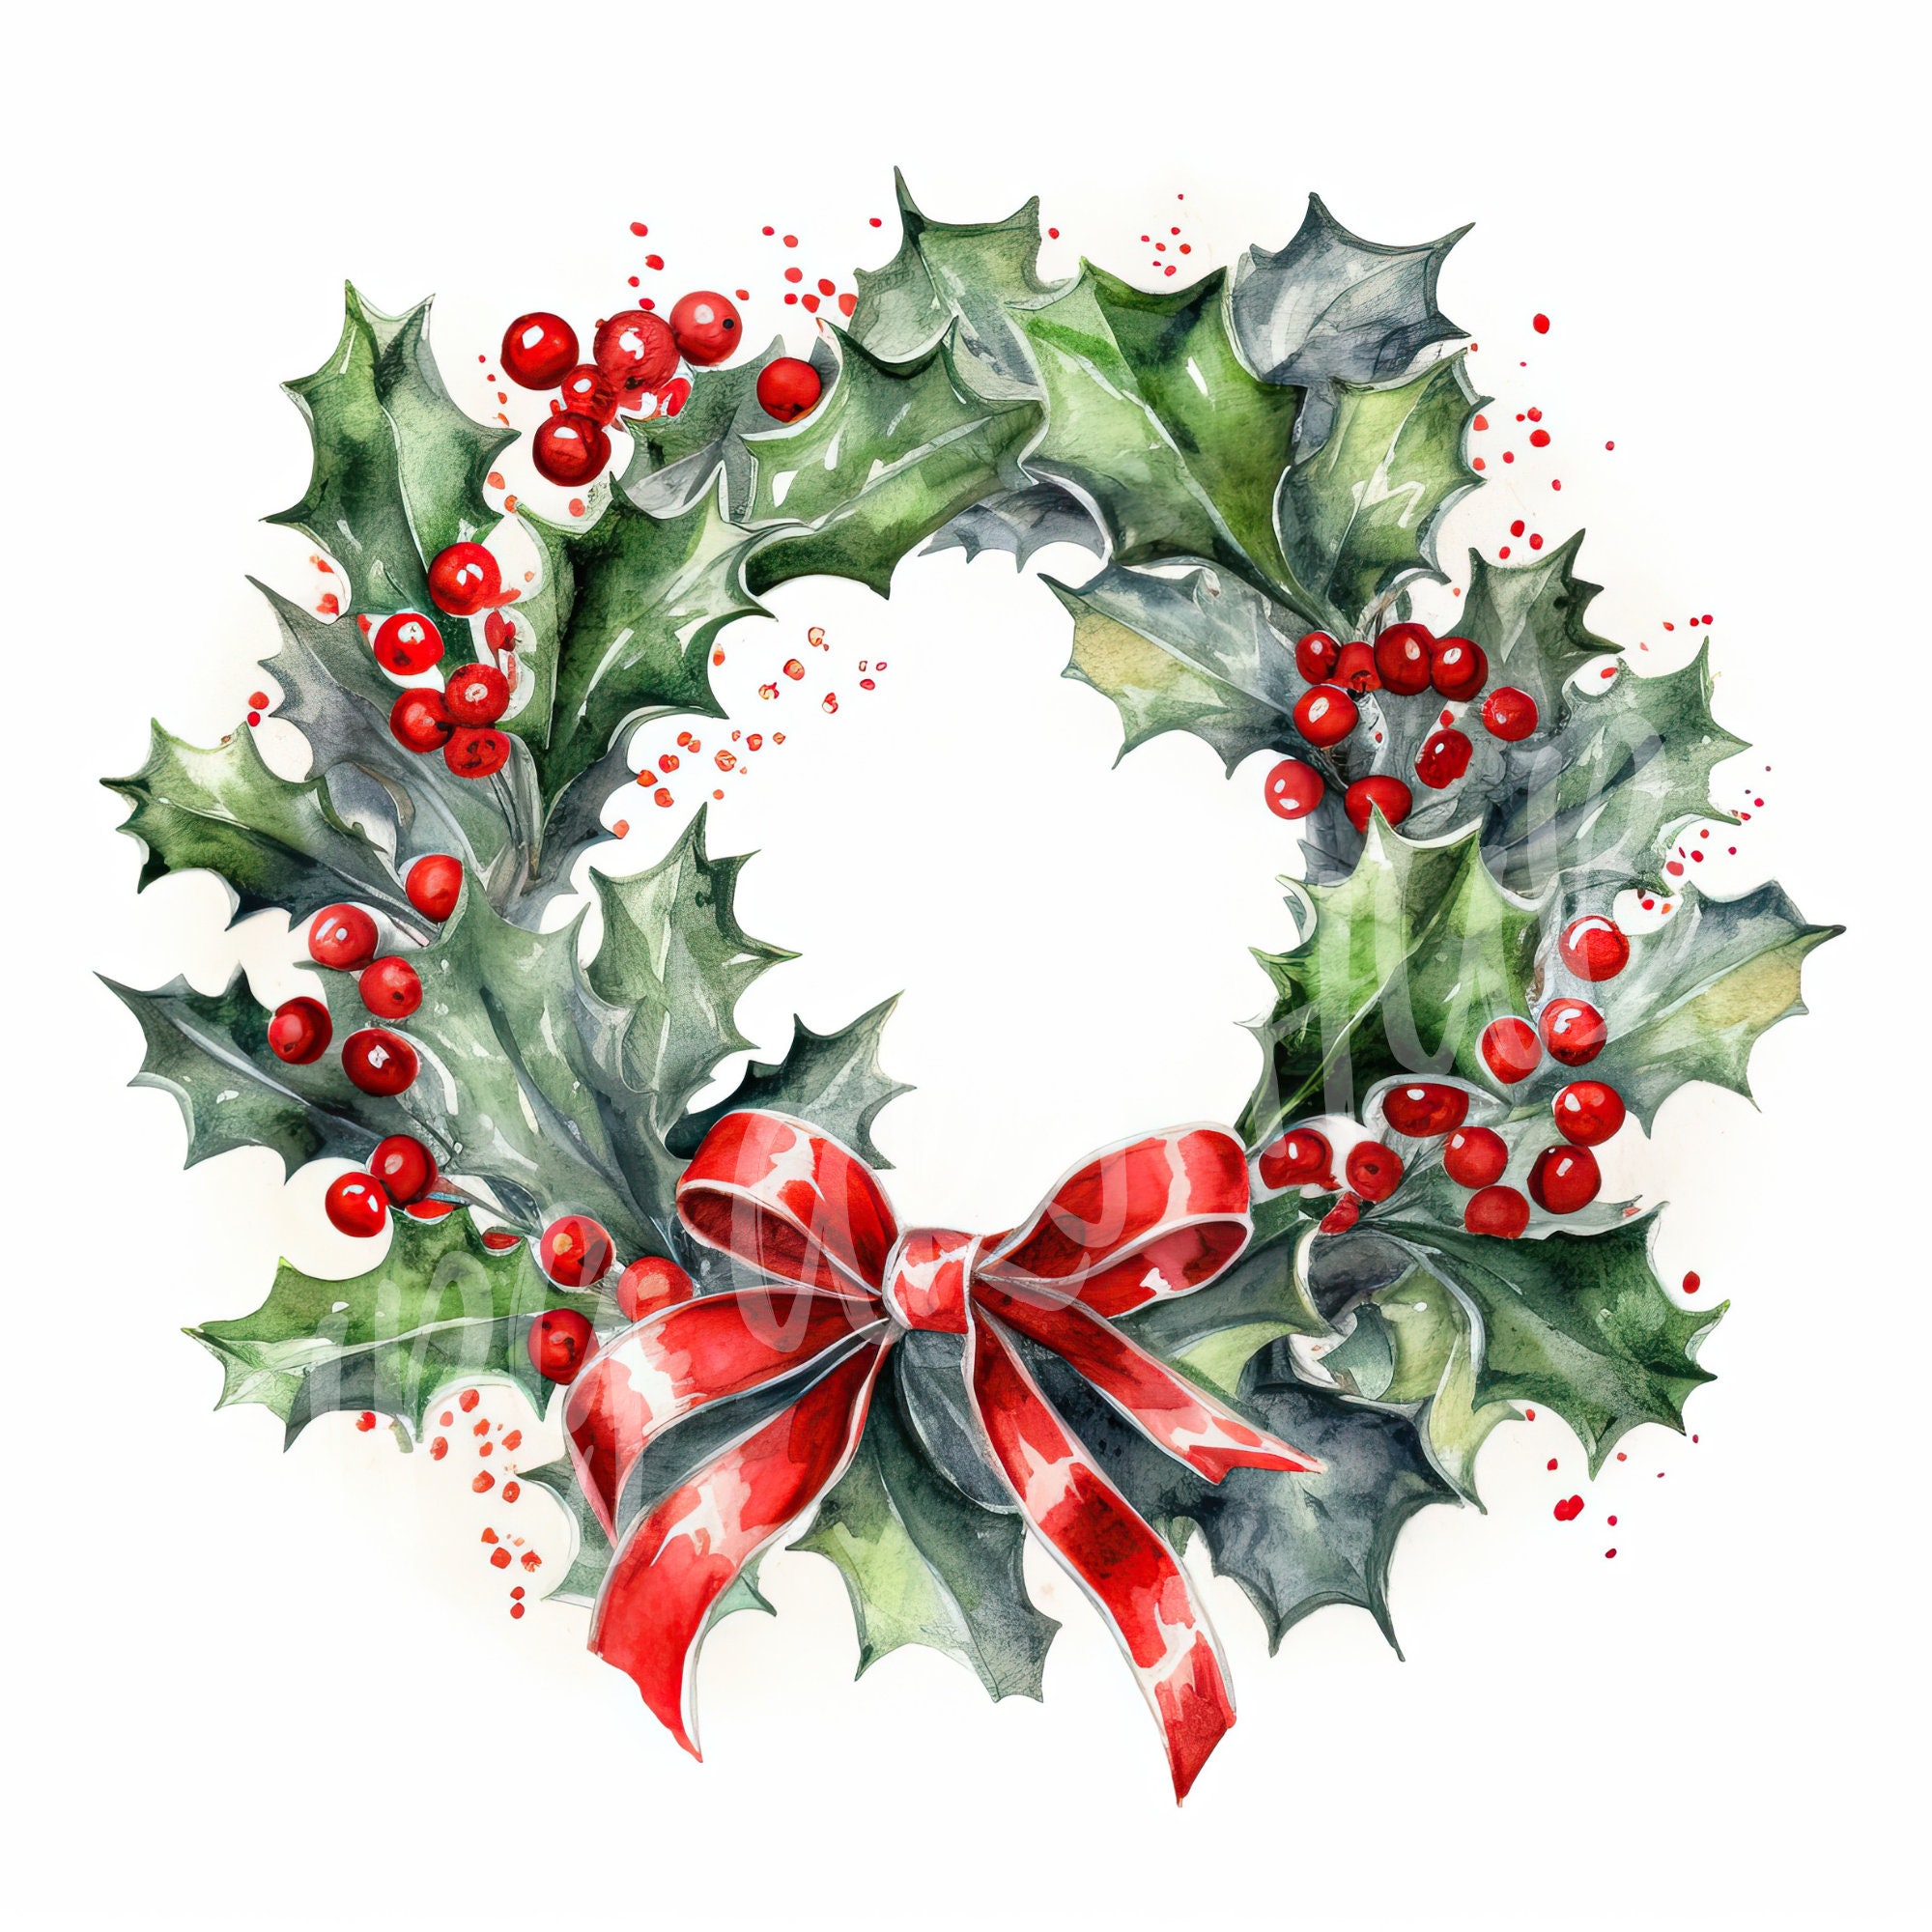 Watercolor Traditional Christmas Wreath Clipart, High Quality JPG ...